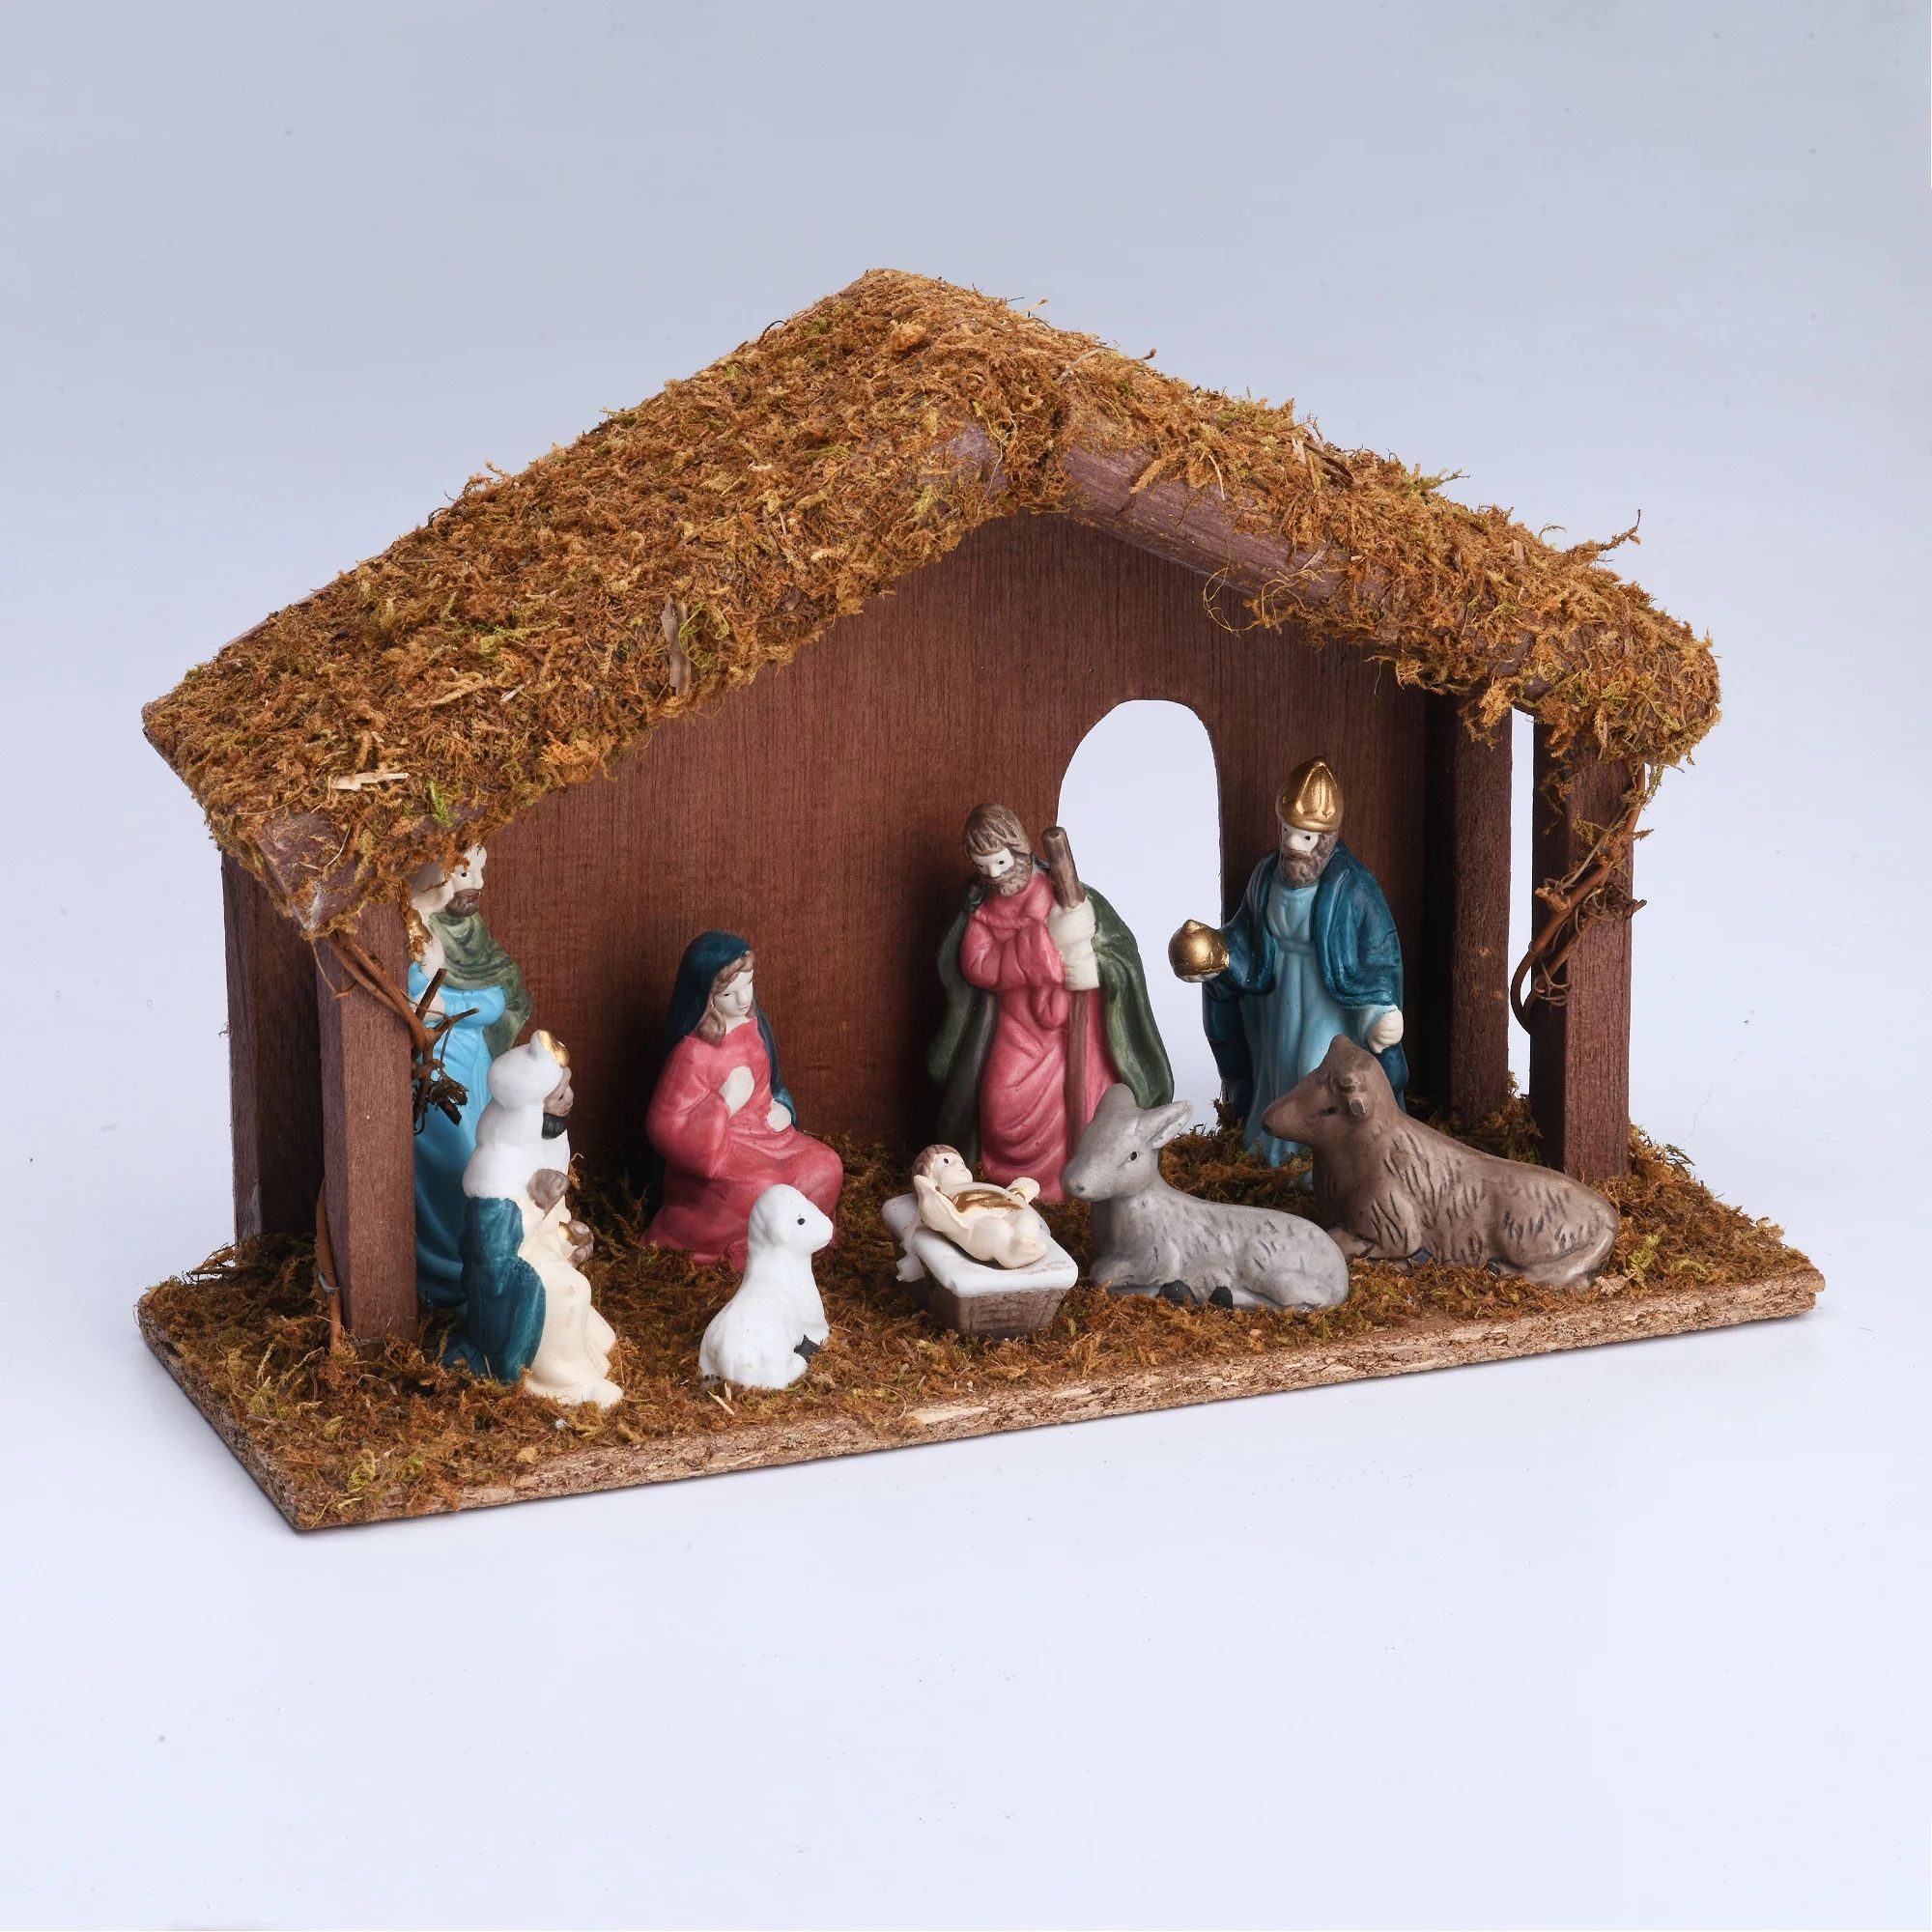 Porcelain Nativity Scene with Wooden Stable, 11 Pieces, by Holiday Time | Walmart (US)